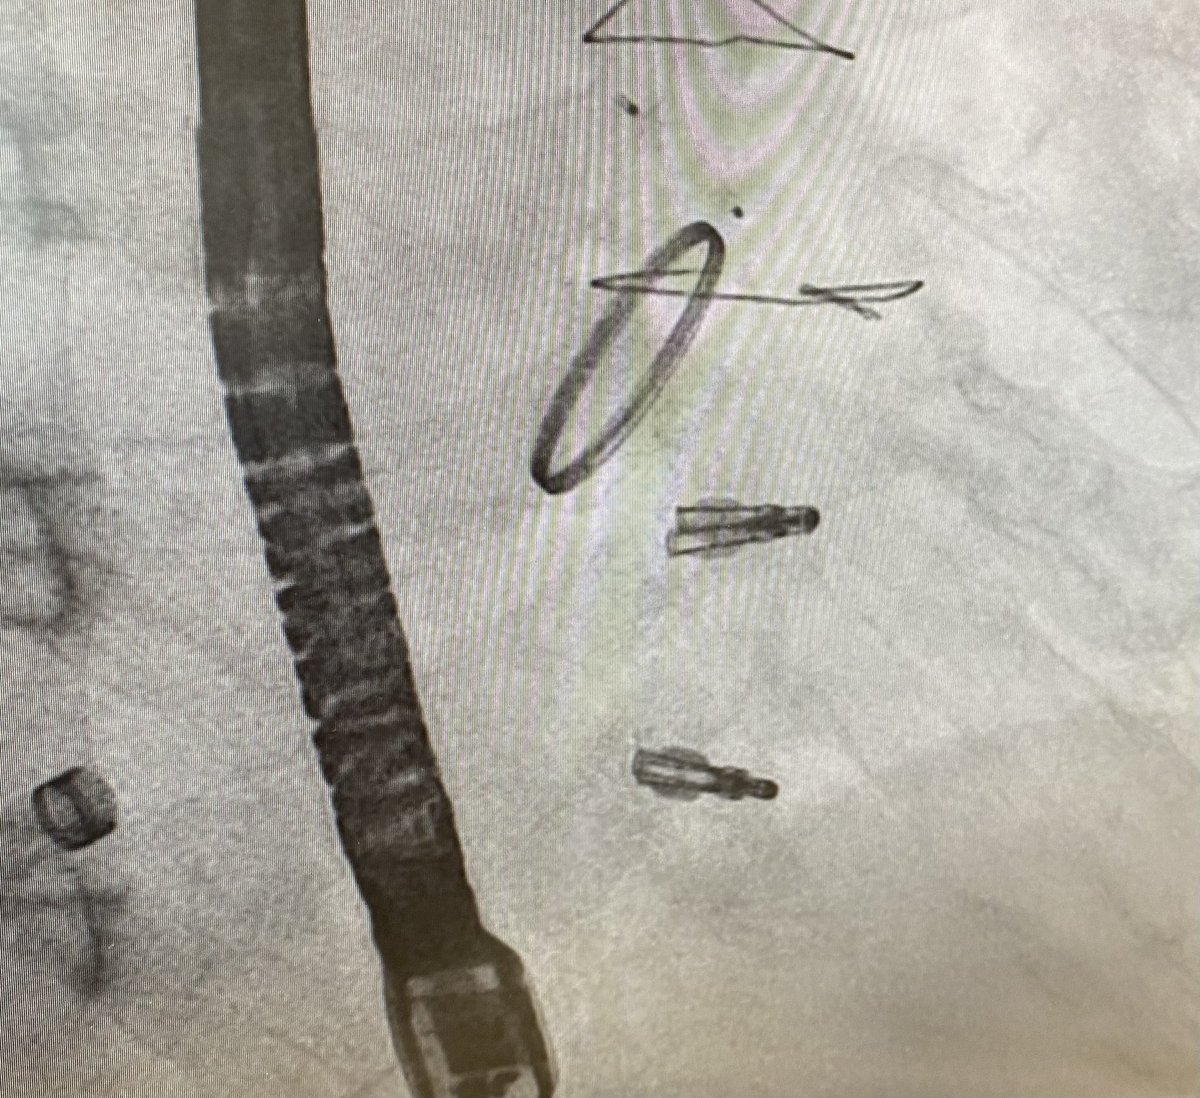 Concurrent MV paravalvular leak closure and TriClip x 2. Great team collaboration! @khungkeong @jacktanwc @ningyan_wong #nhcs #structuralintervention #CardioTwitter